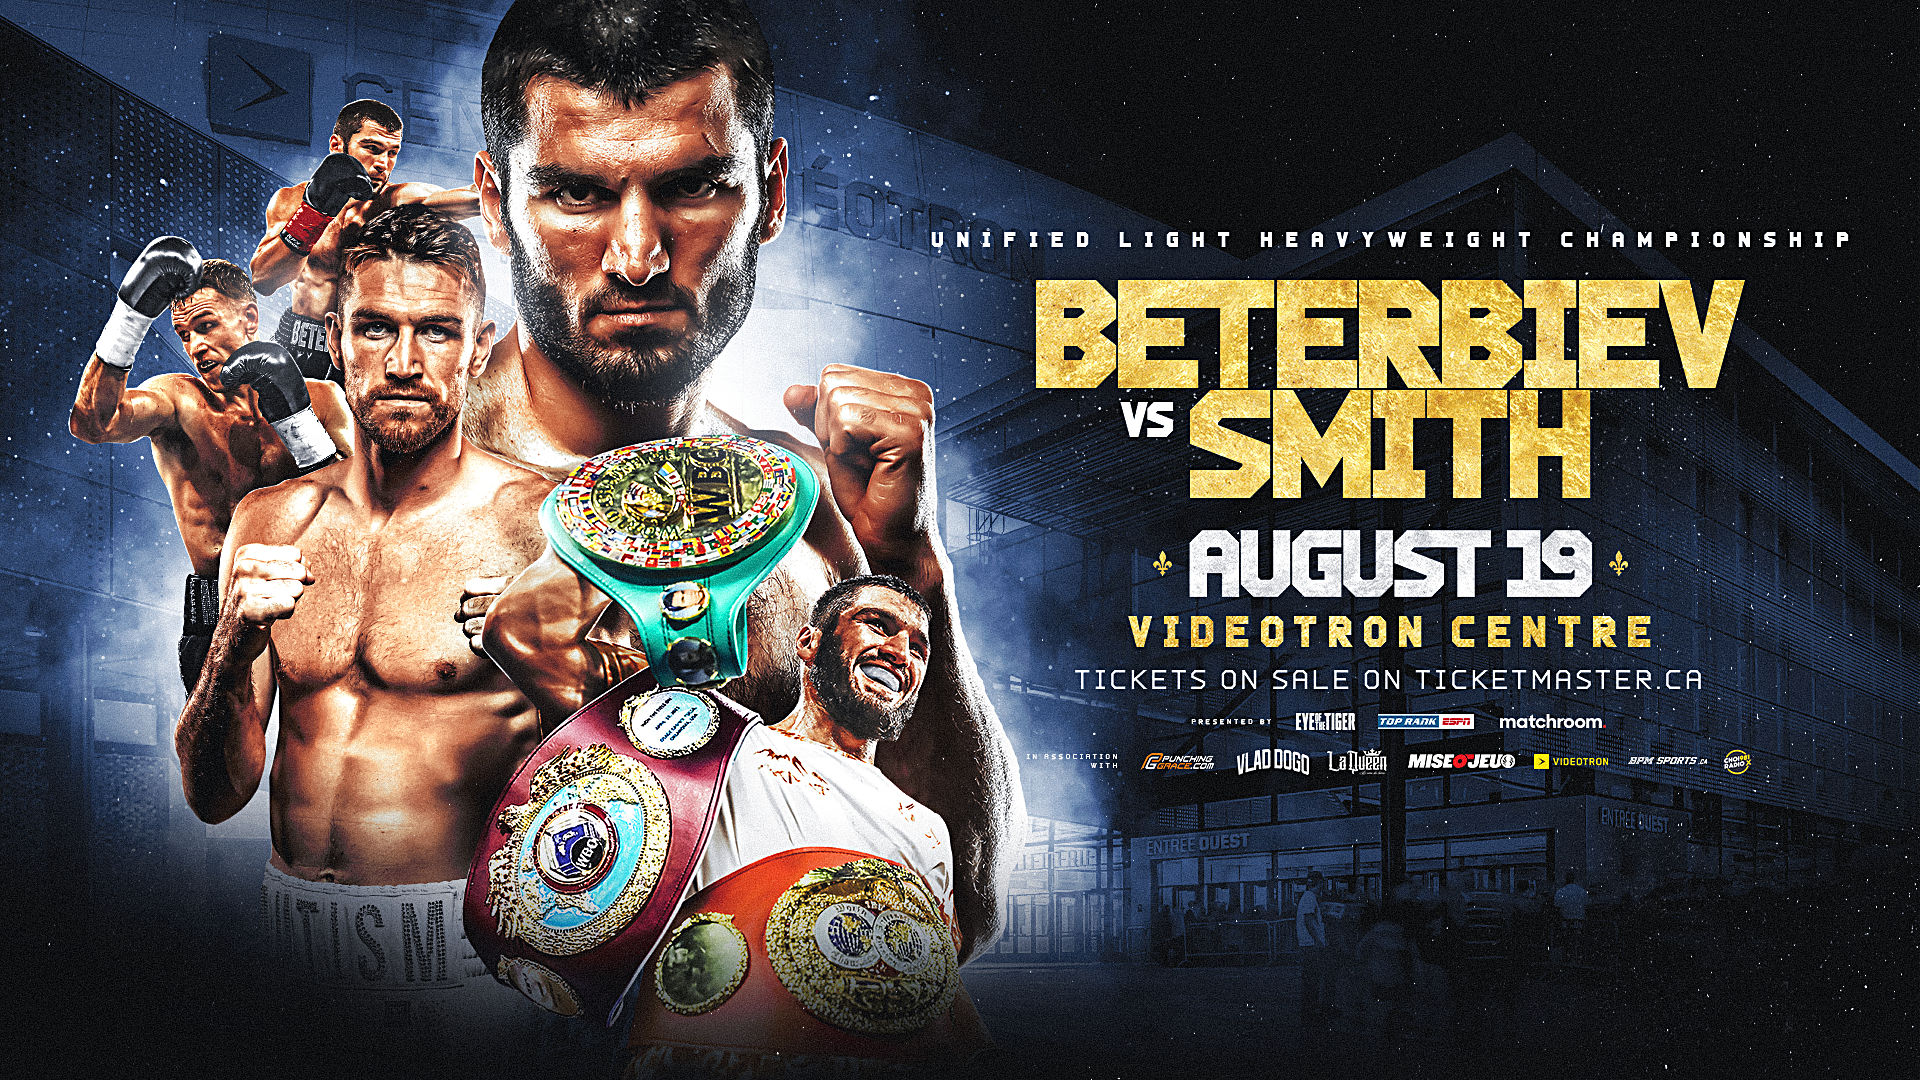 August 19 Unified Light Heavyweight King Artur Beterbiev to Defend Crown Against Callum Smith at Videotron Centre in Quebec City and LIVE on ESPN